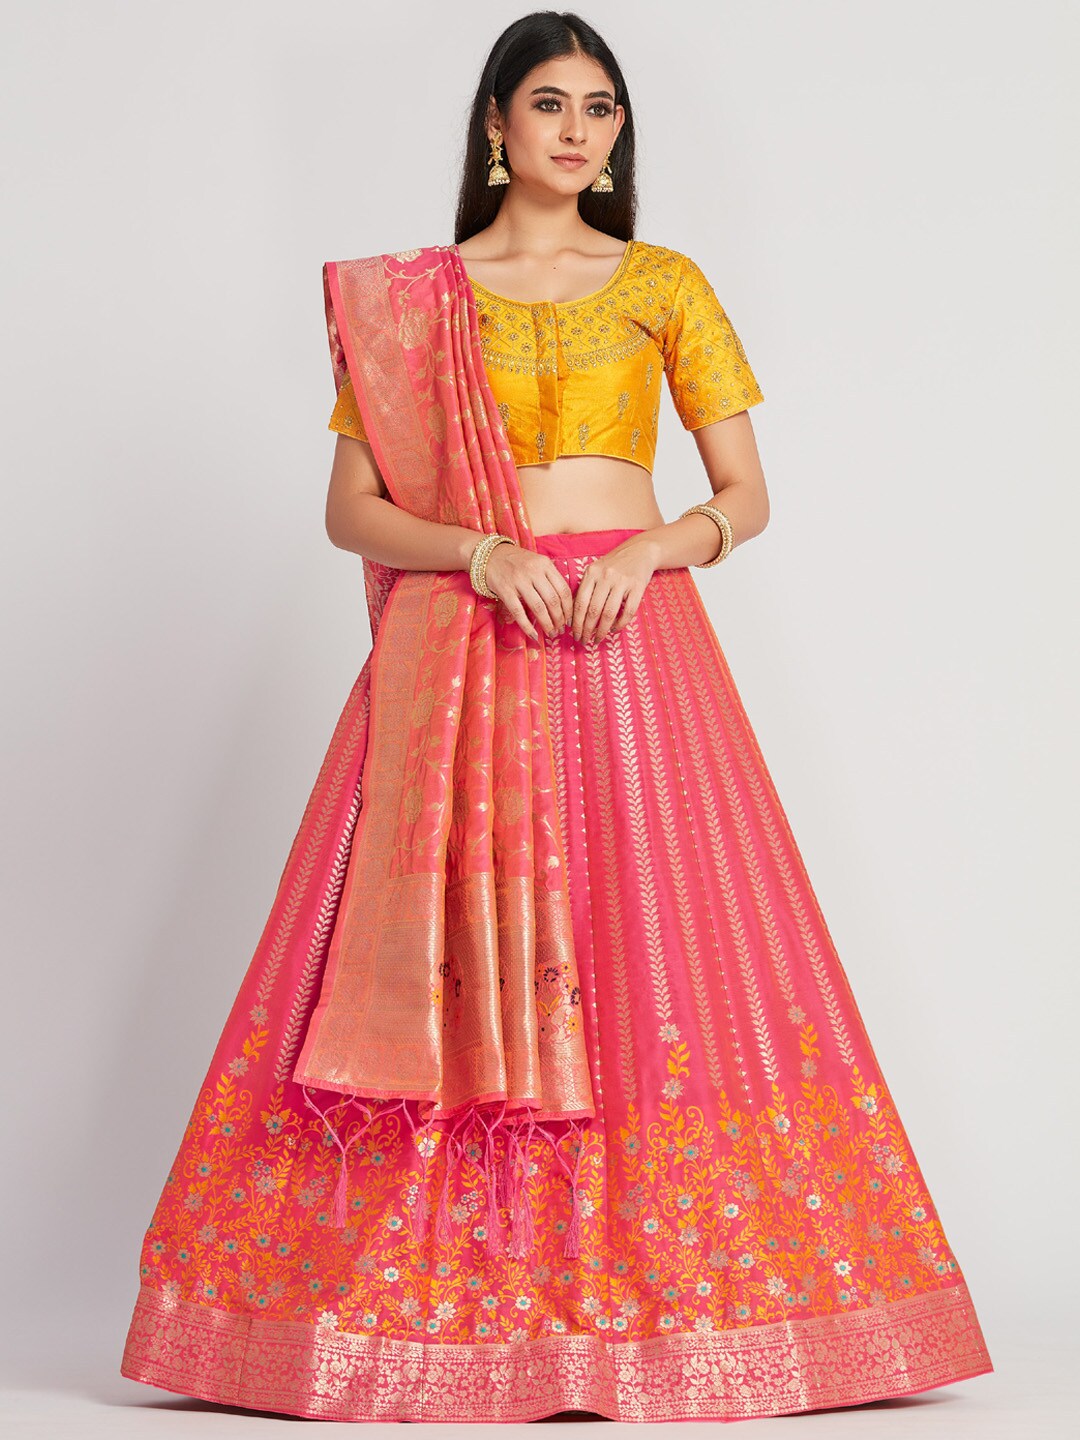 MIMOSA Pink & Yellow Embroidered Semi-Stitched Lehenga & Blouse with Dupatta Price in India